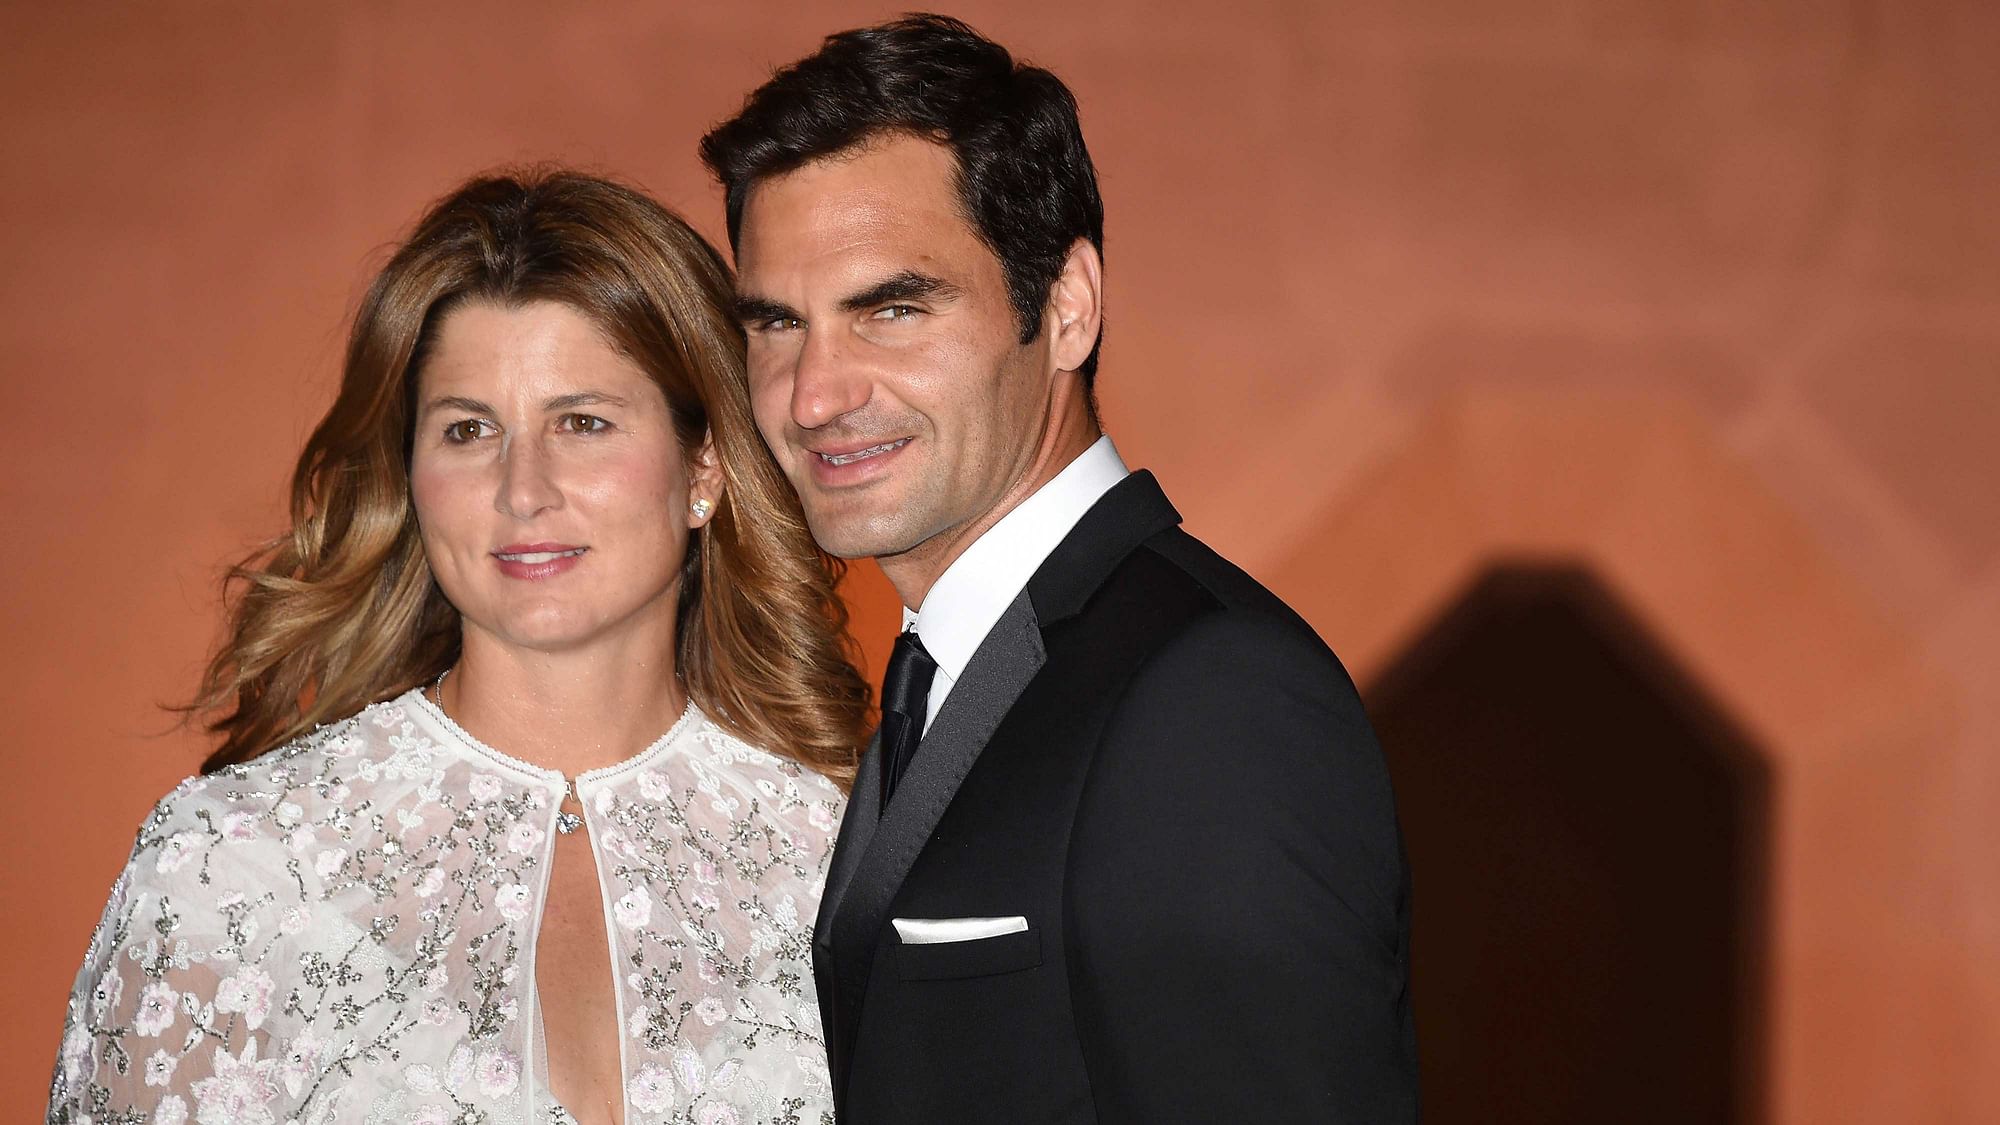 Wimbledon champion Switzerland’s Roger Federer and his wife Mirka arrive at the Wimbledon Champions Dinner